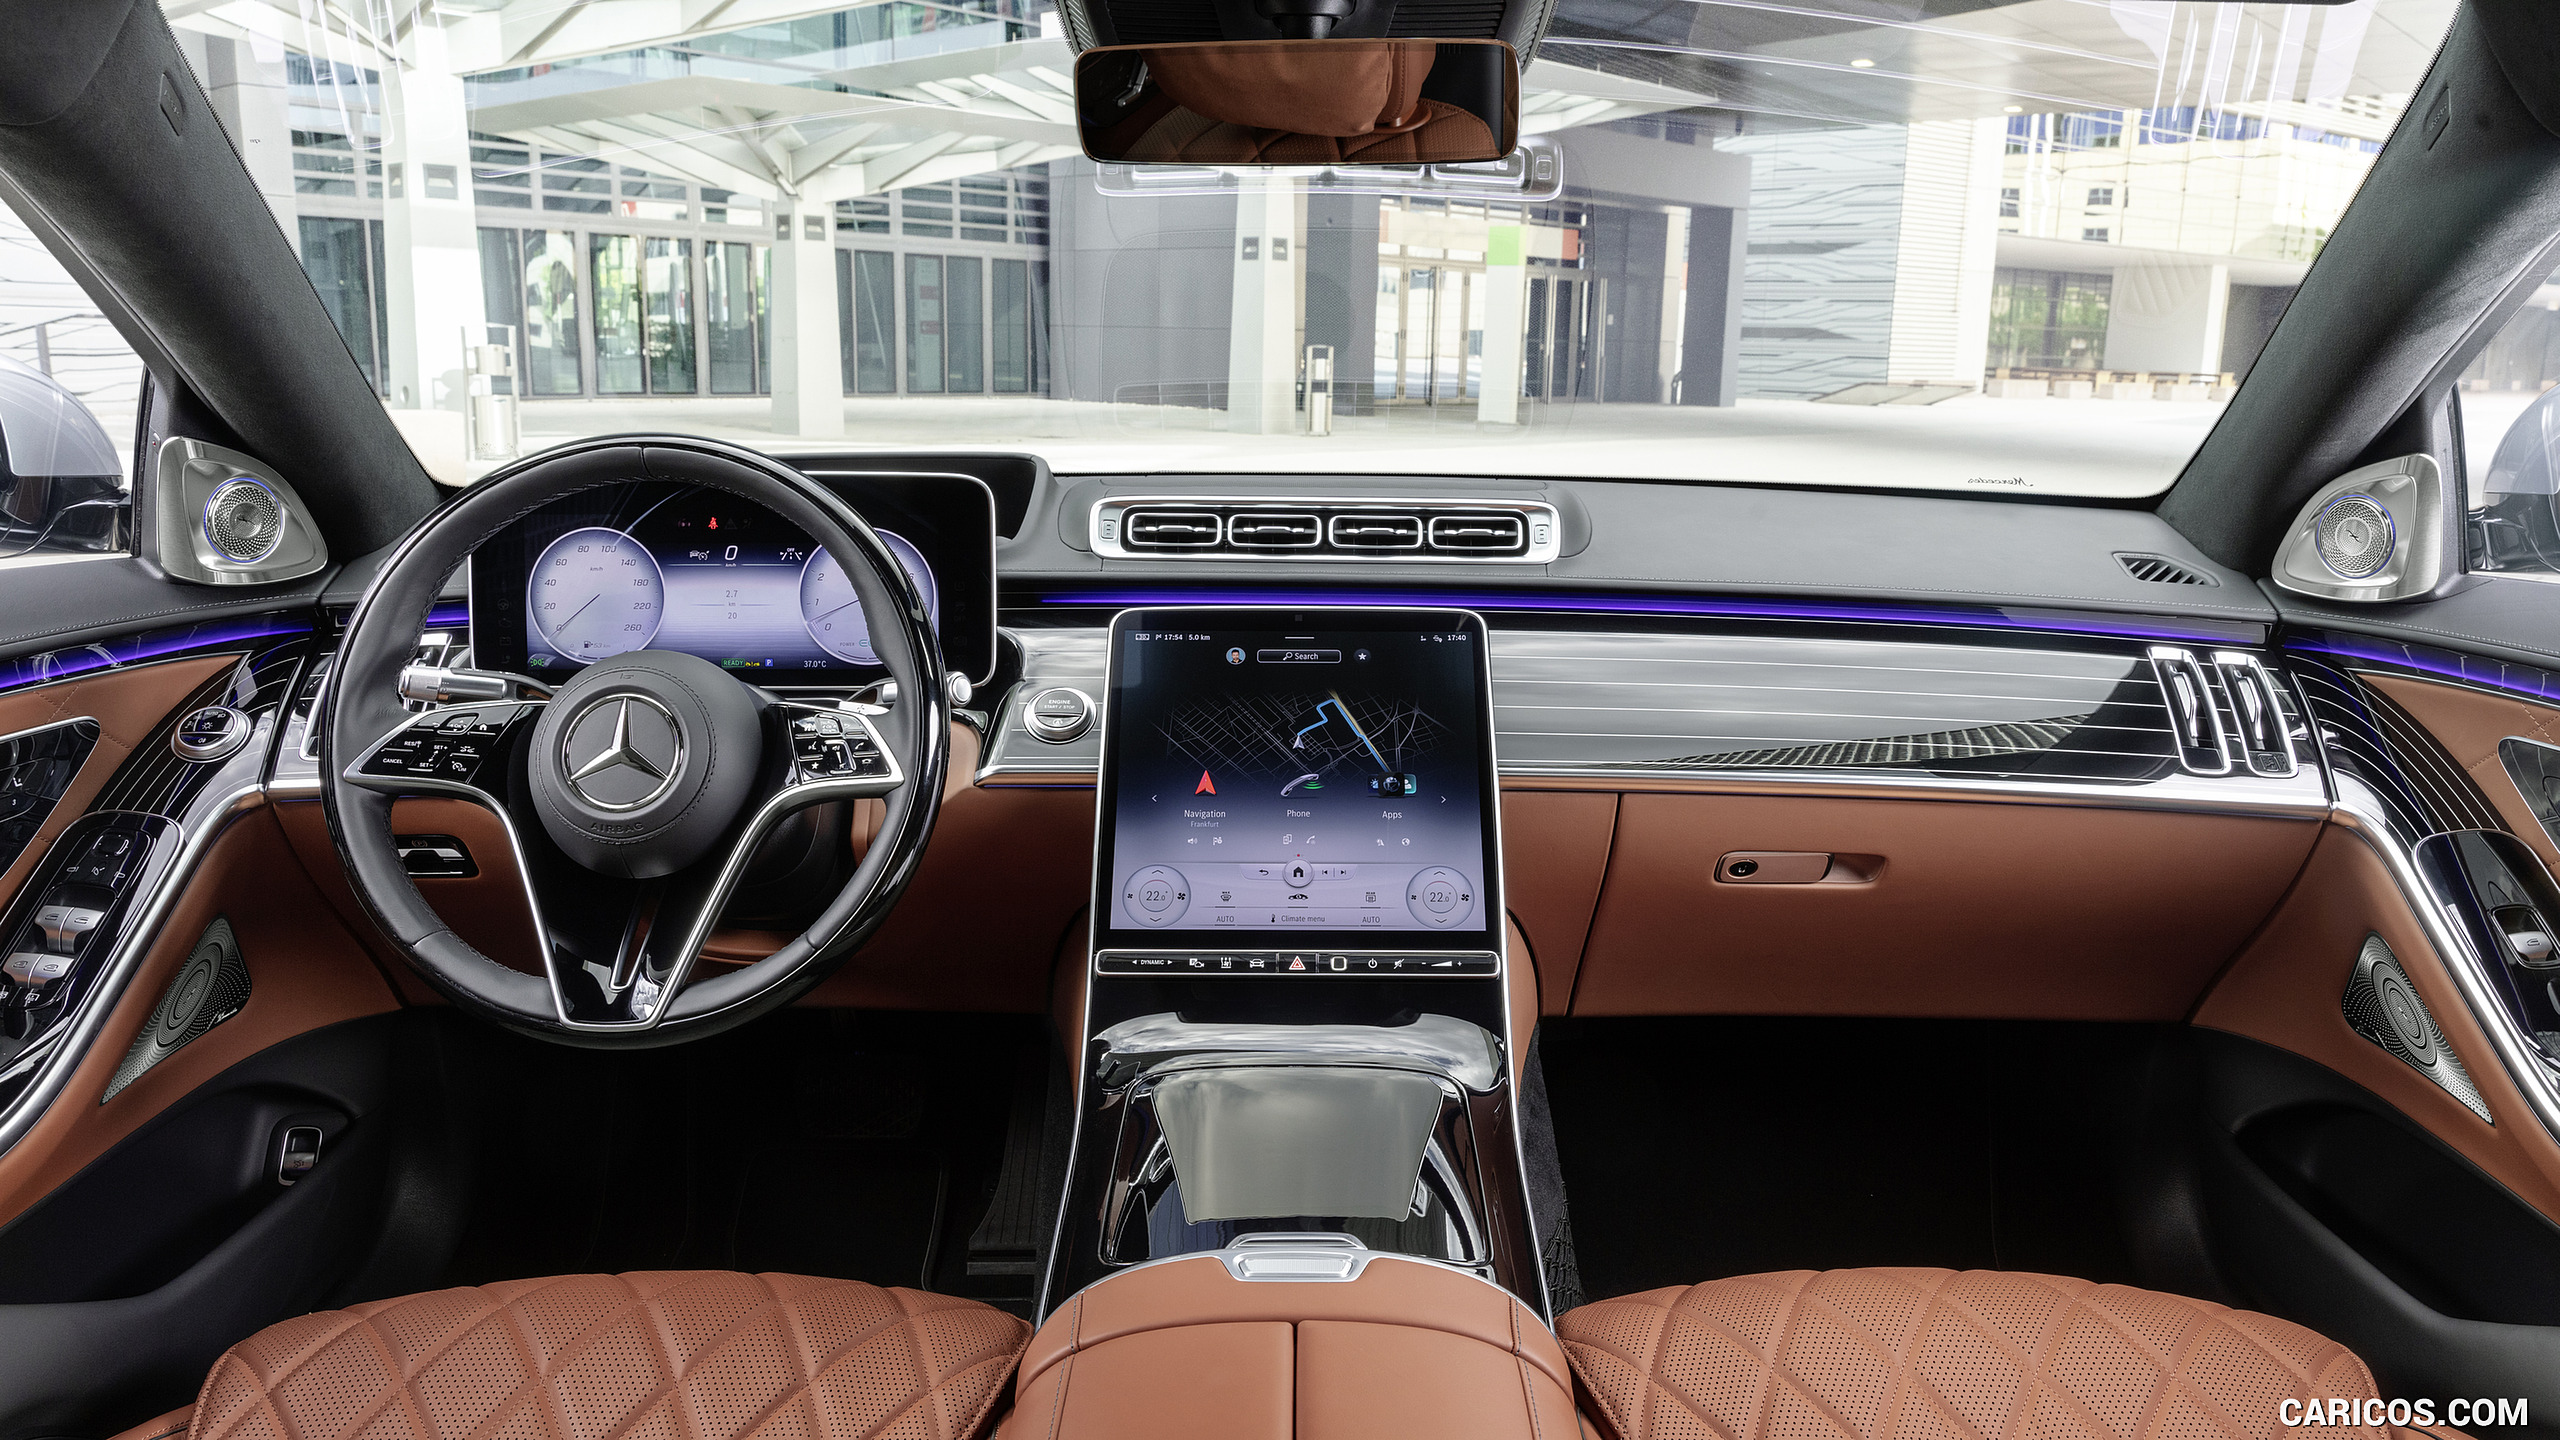 2021 Mercedes-Benz S-Class (Color: Leather Siena Brown) - Interior, Cockpit, #100 of 316